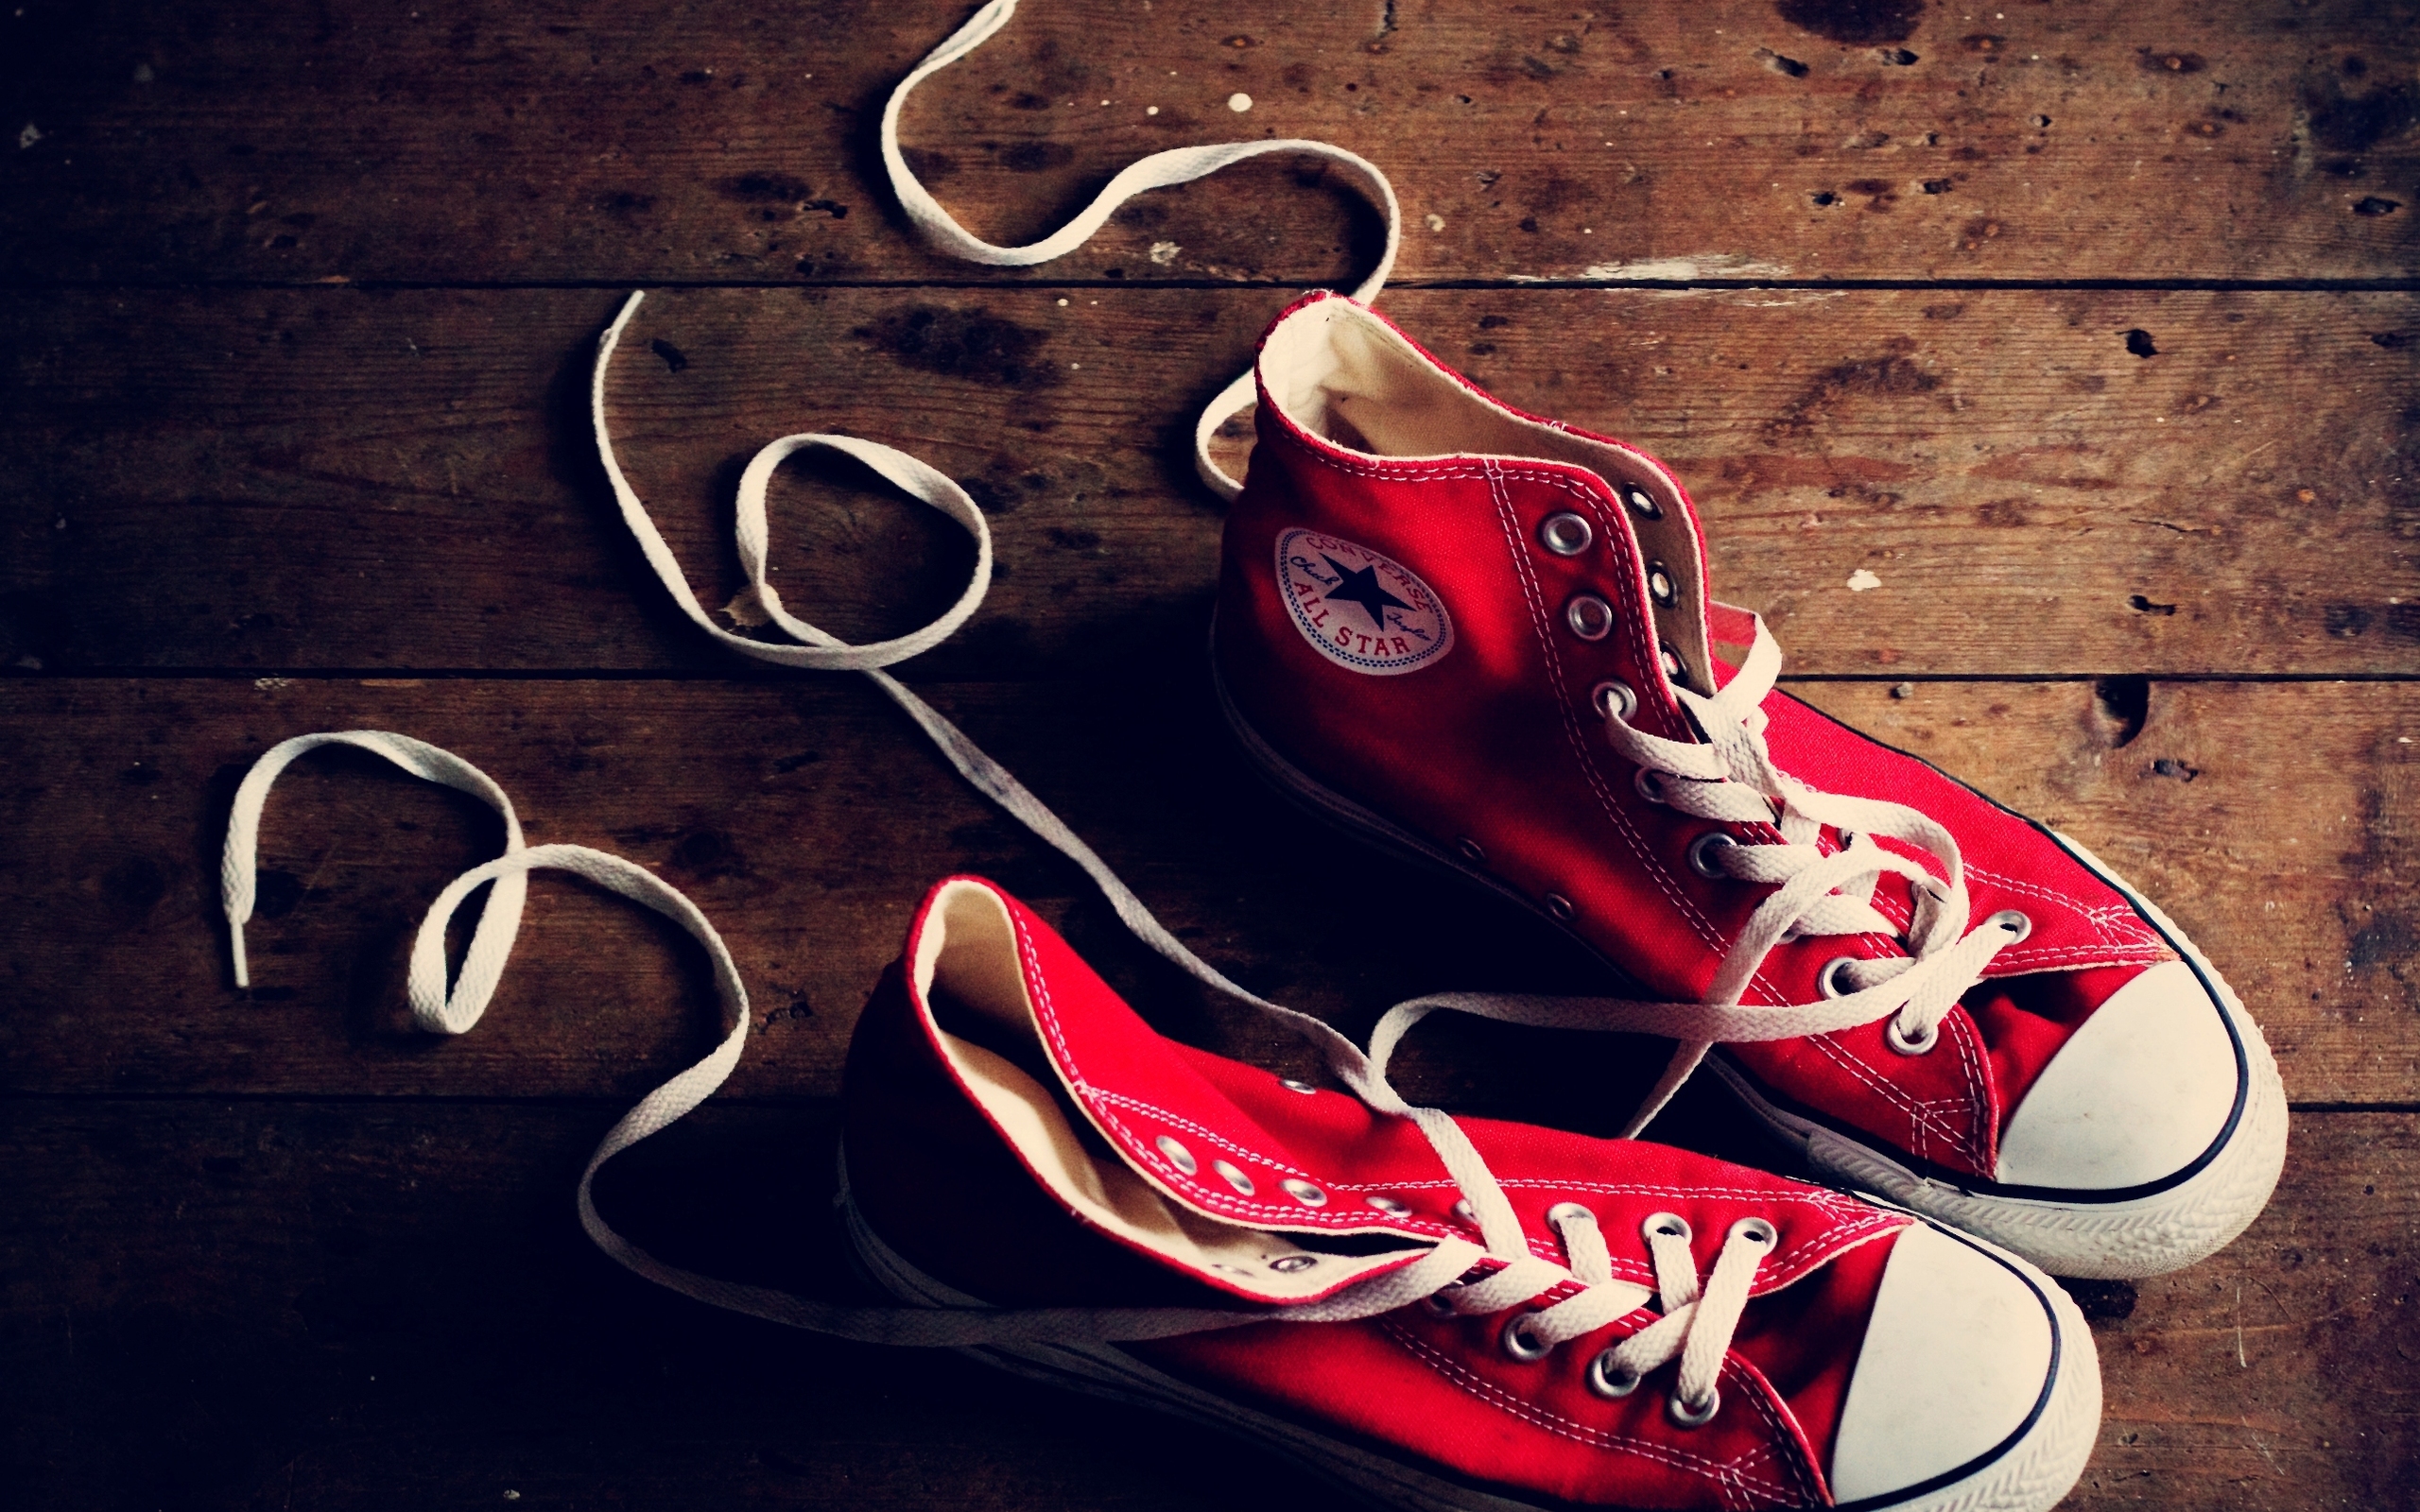 A vibrant and stylish desktop wallpaper featuring classic Converse footwear.